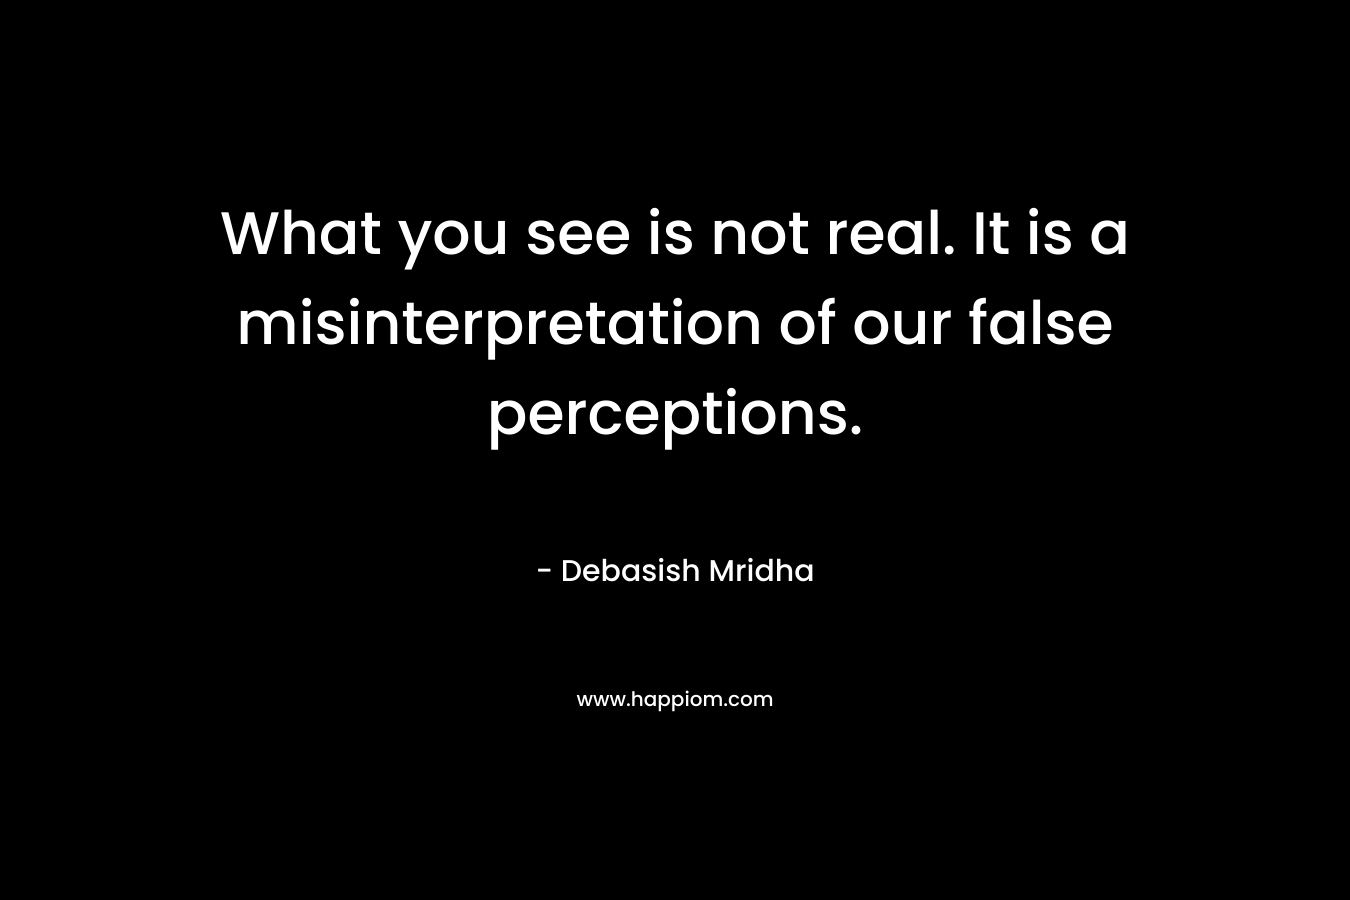 What you see is not real. It is a misinterpretation of our false perceptions. – Debasish Mridha